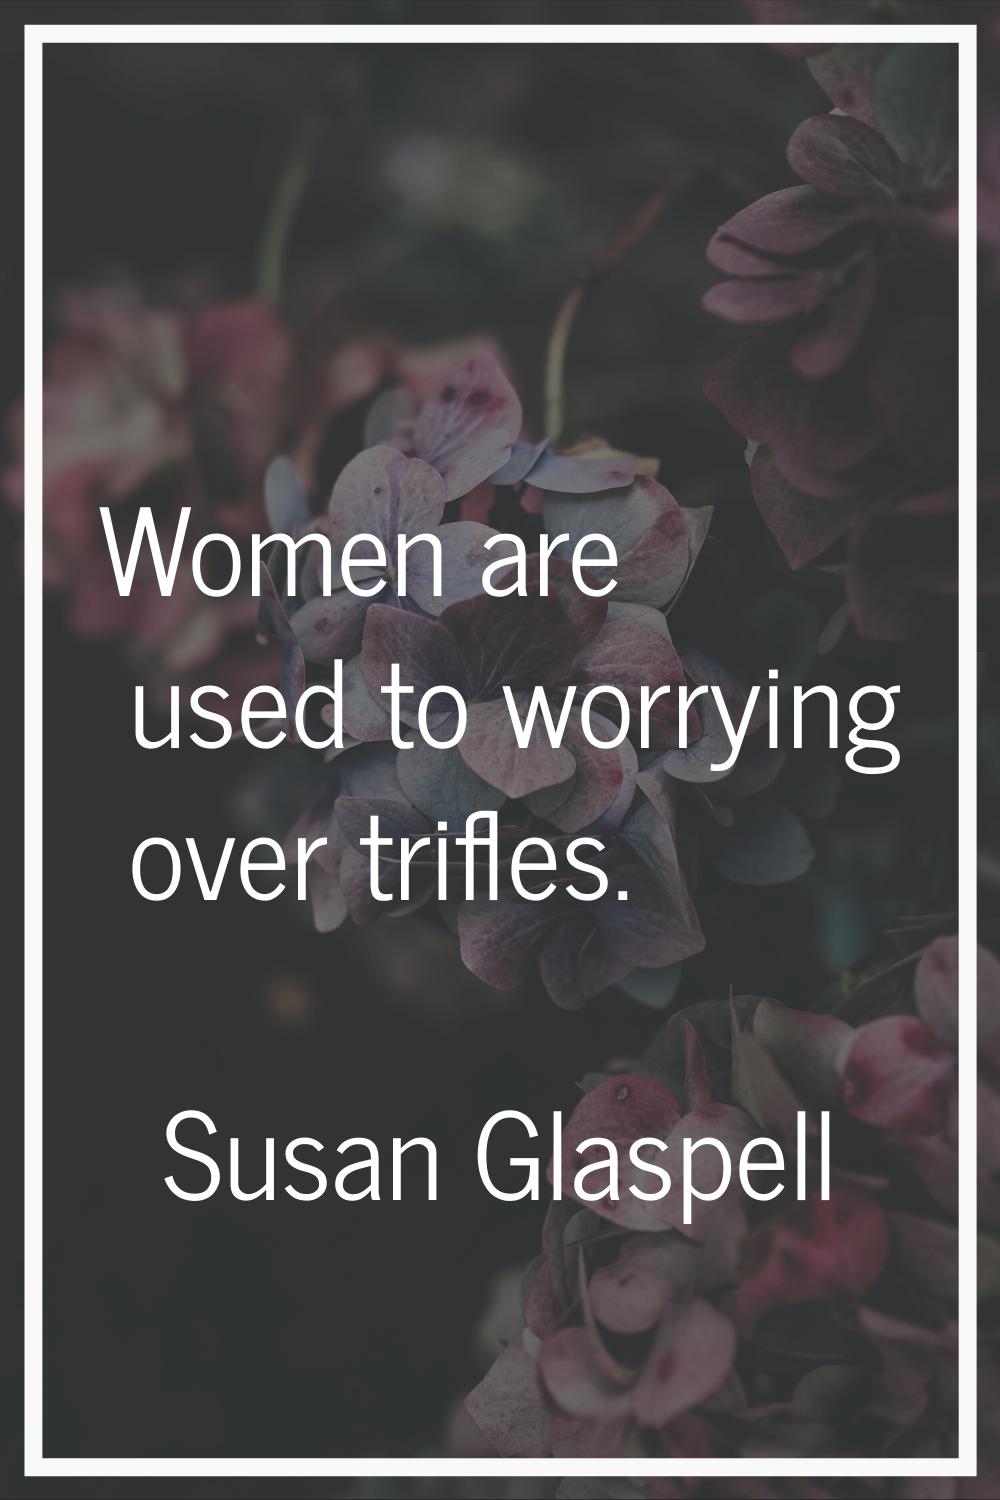 Women are used to worrying over trifles.